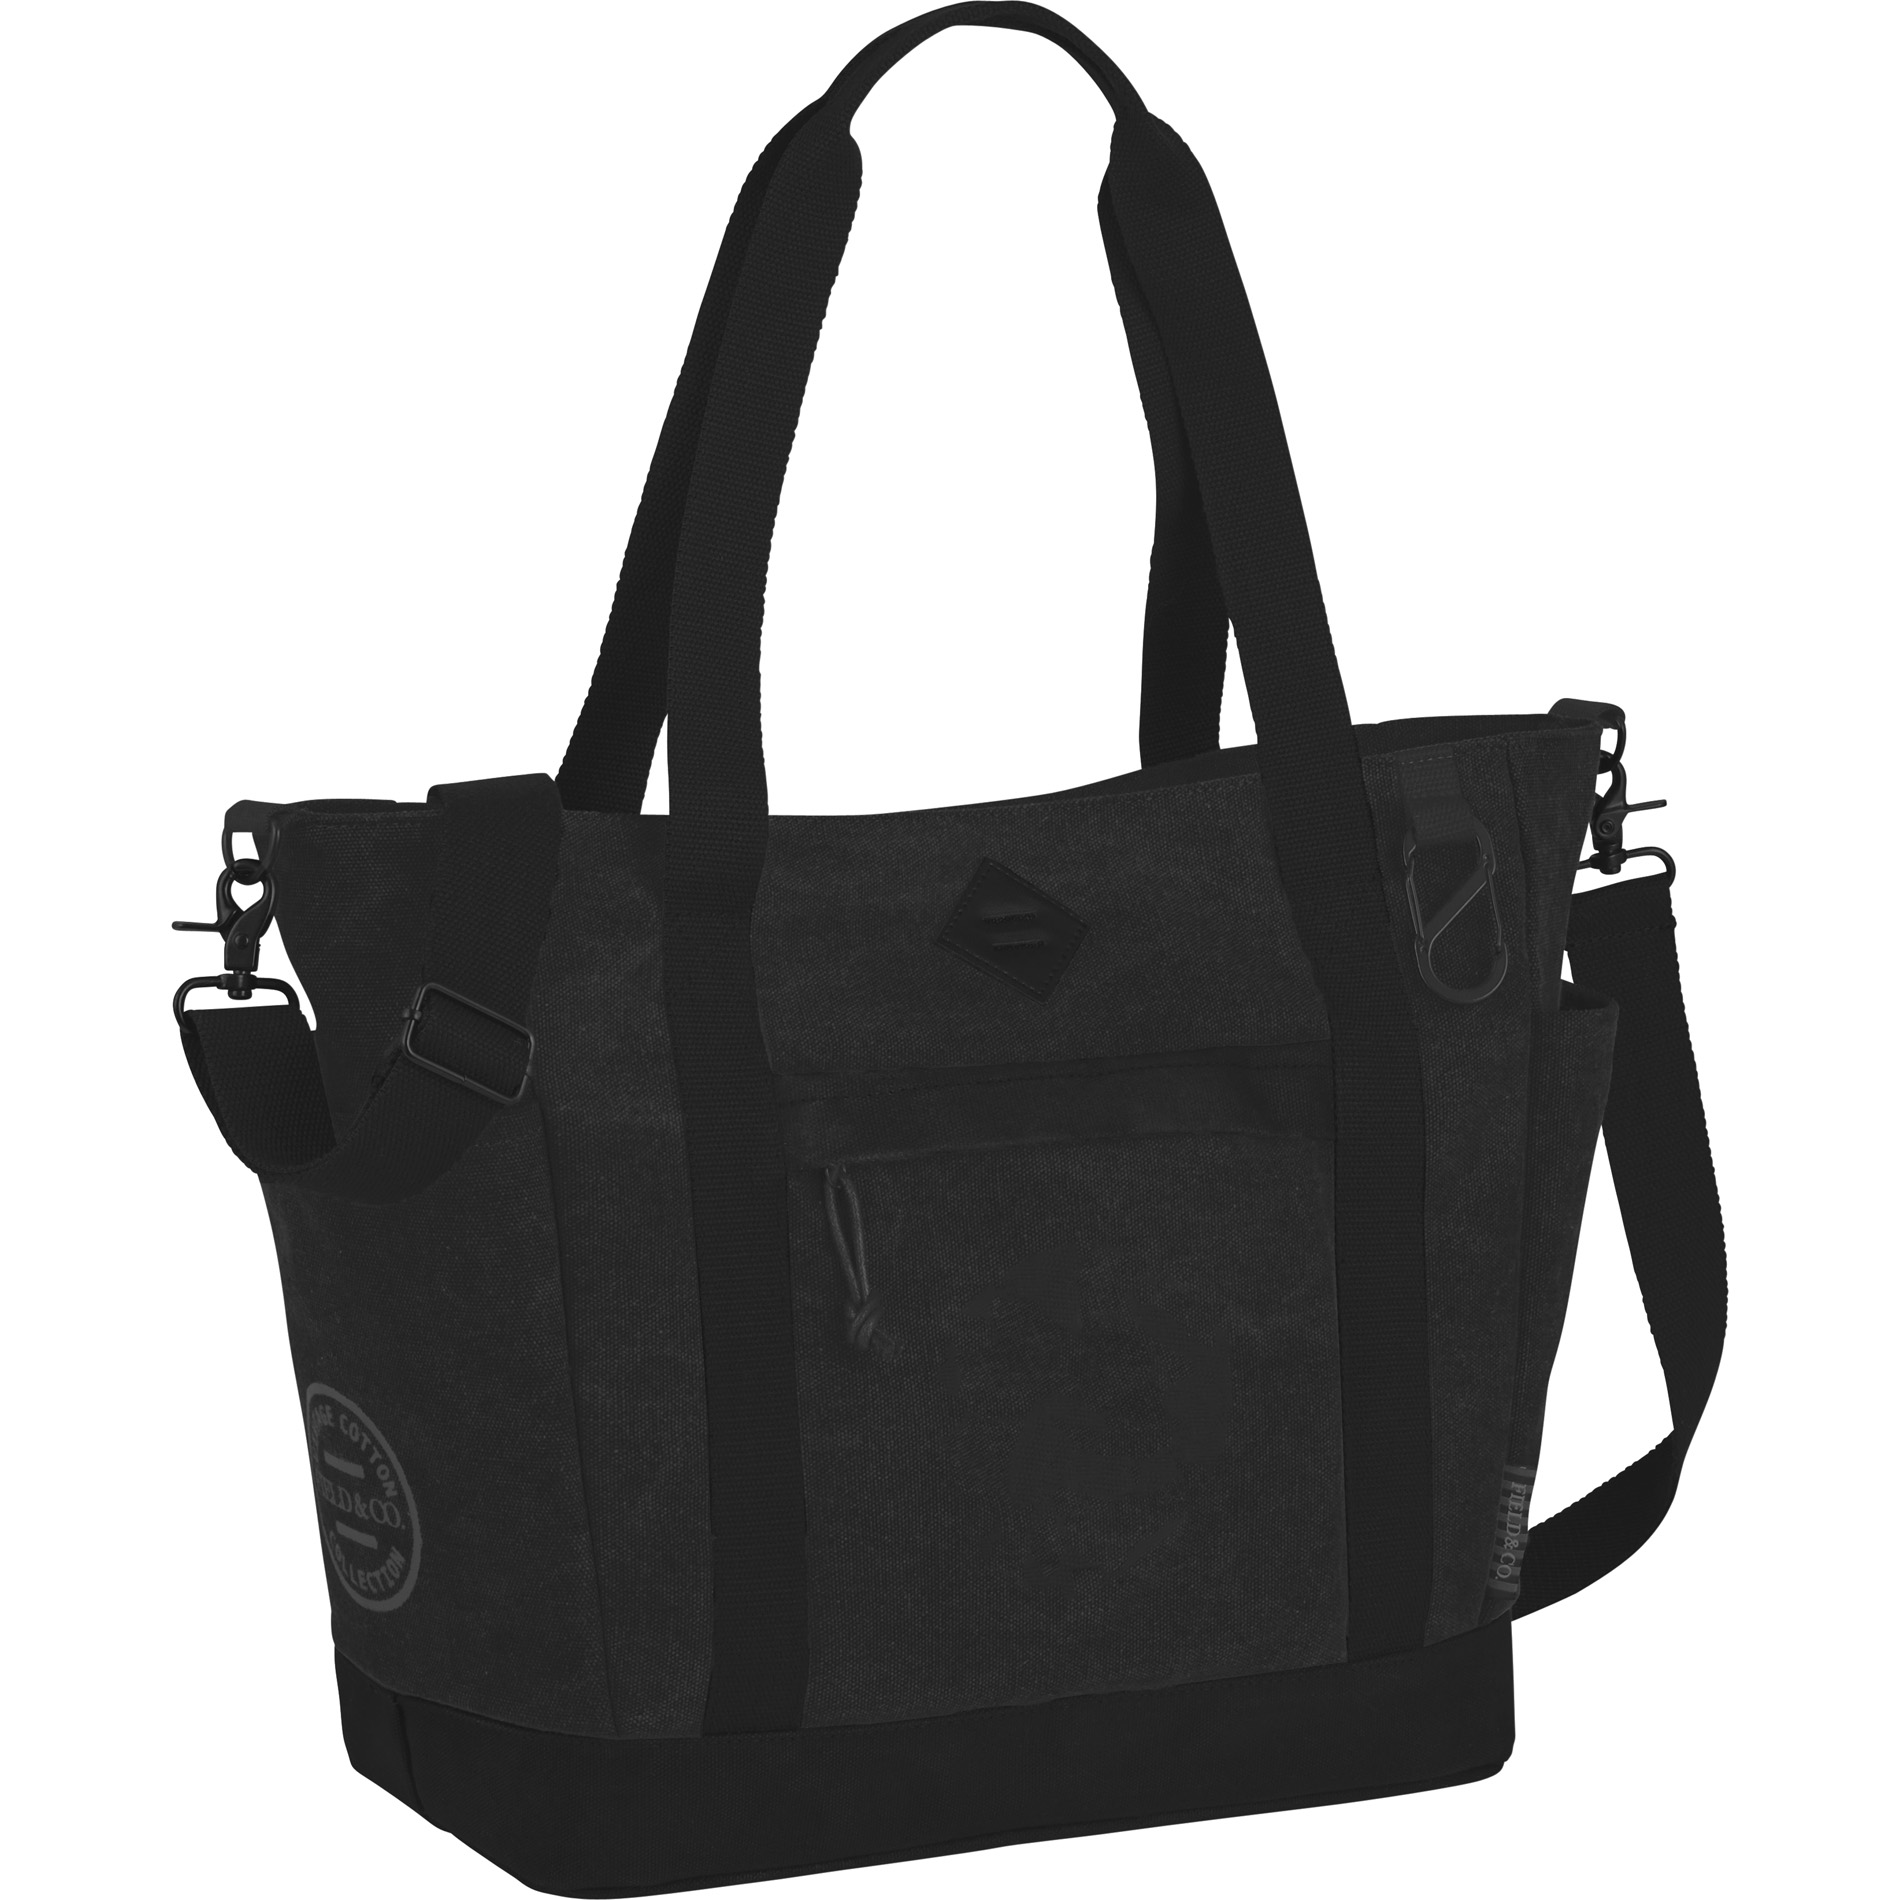 Field & Co. 7950-39 - Woodland Tote